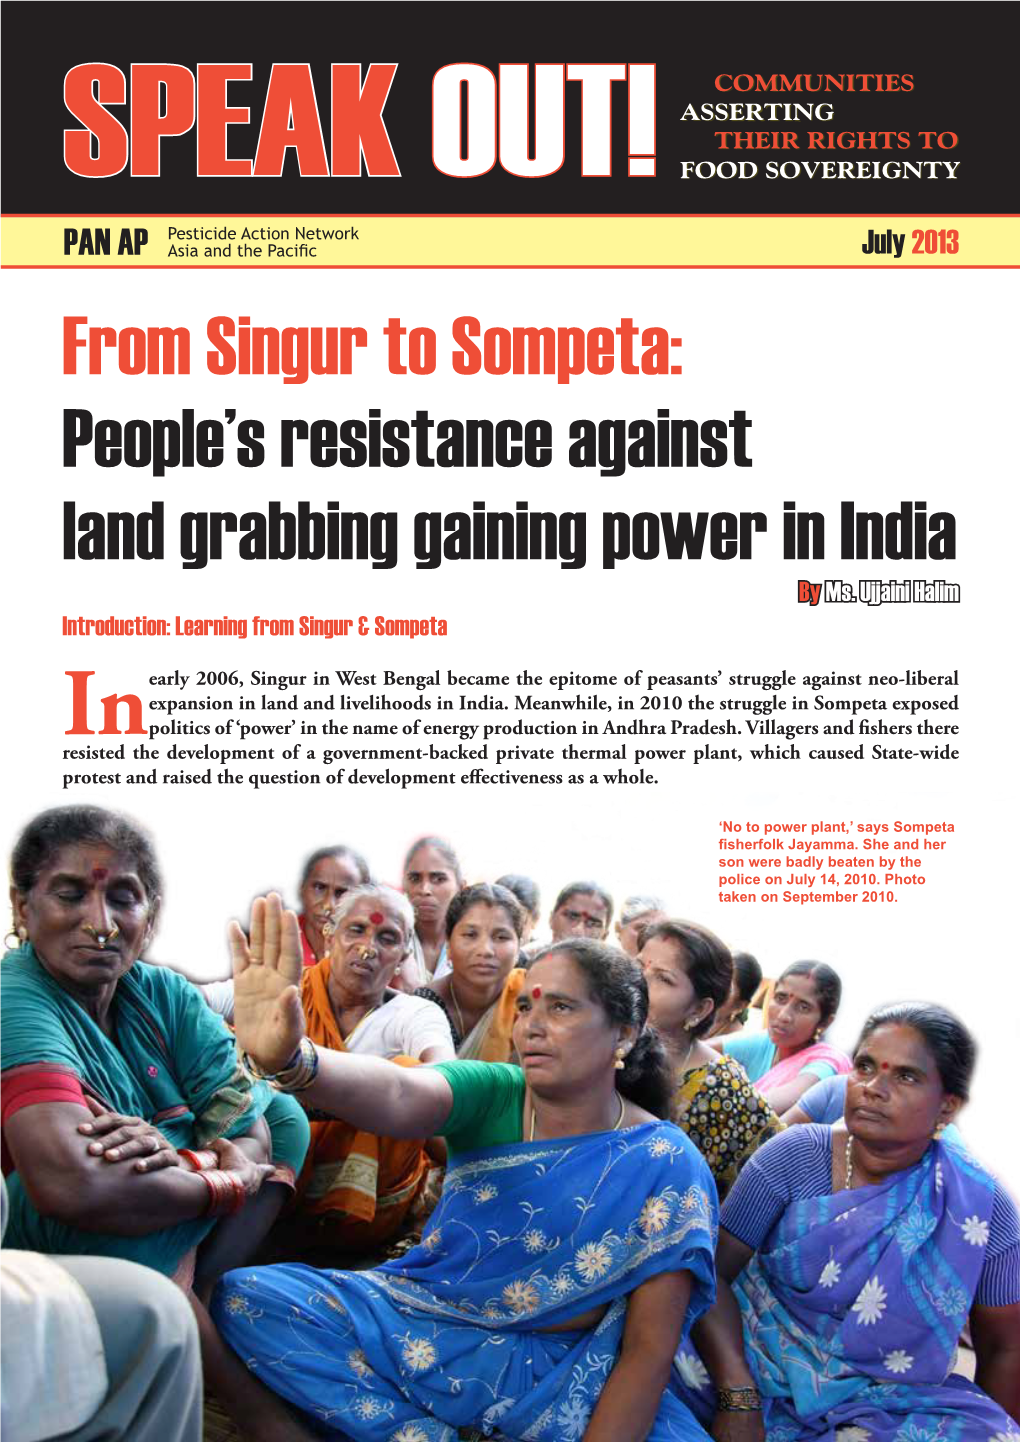 From Singur to Sompeta: People's Resistance Against Land Grabbing